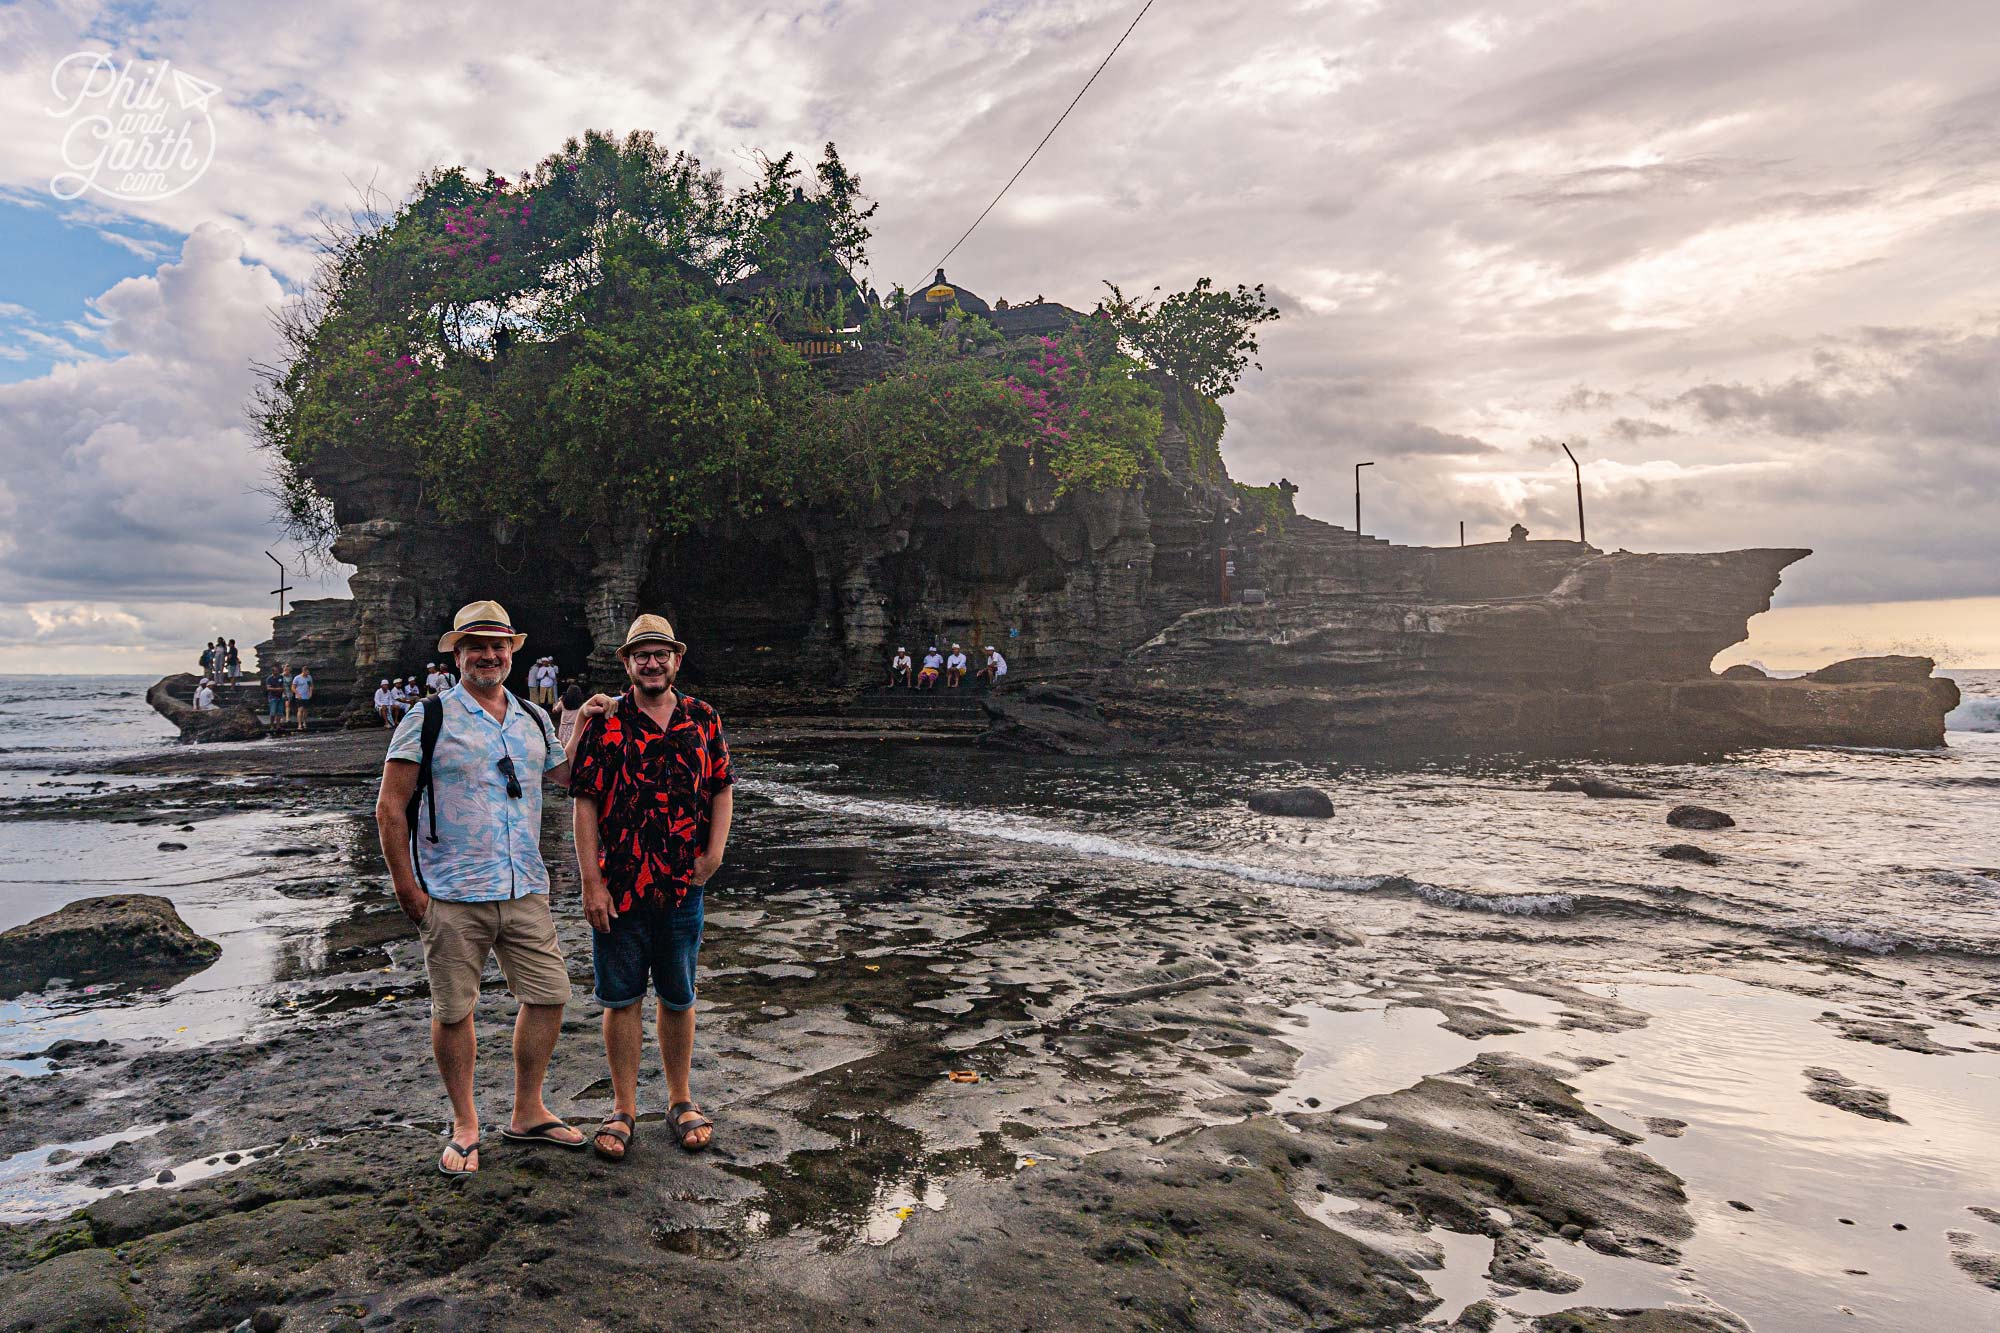 Pura Tanah Lot is one of Bali’s most famous temples, which you can reach at low tide